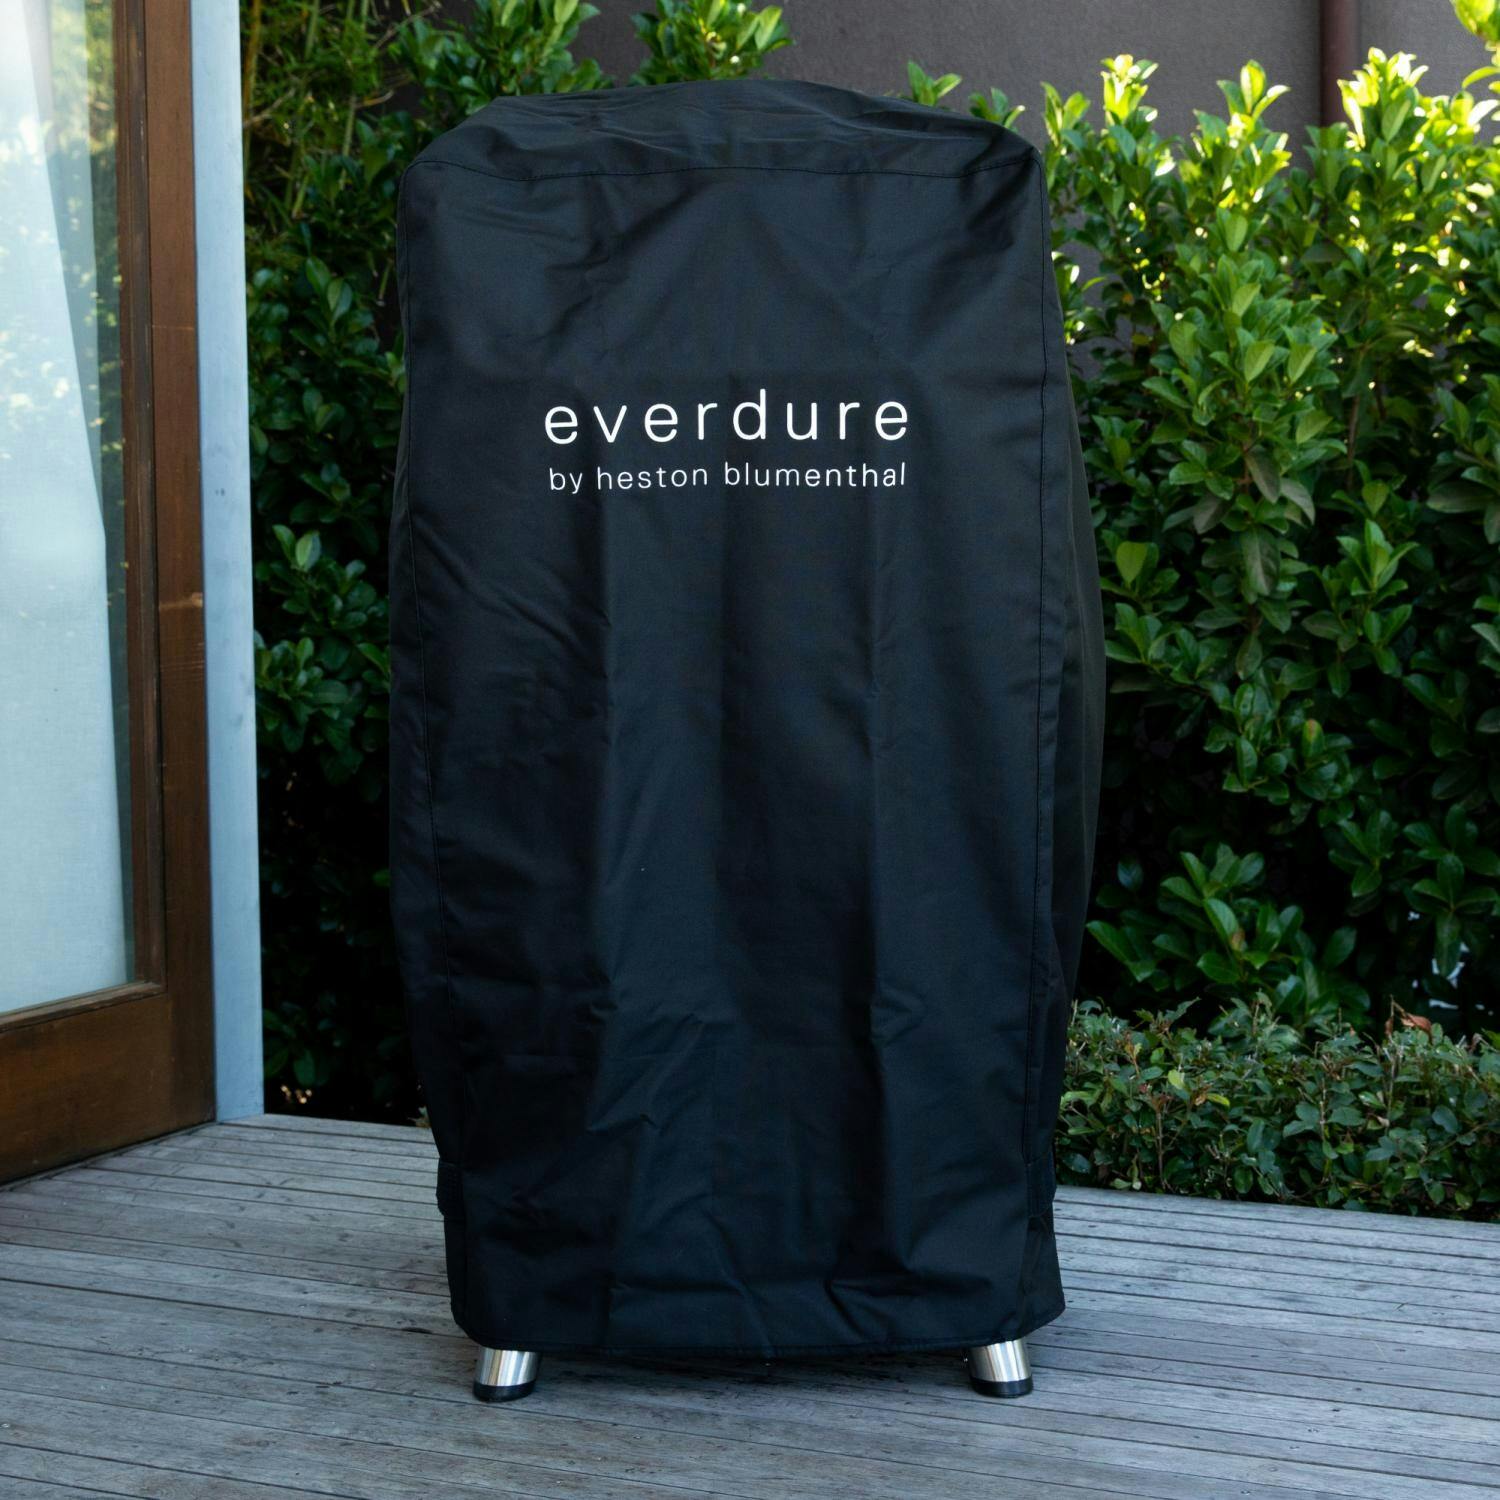 Everdure by Heston Blumenthal Long Grill Cover for 4K Charcoal Grill & Smoker